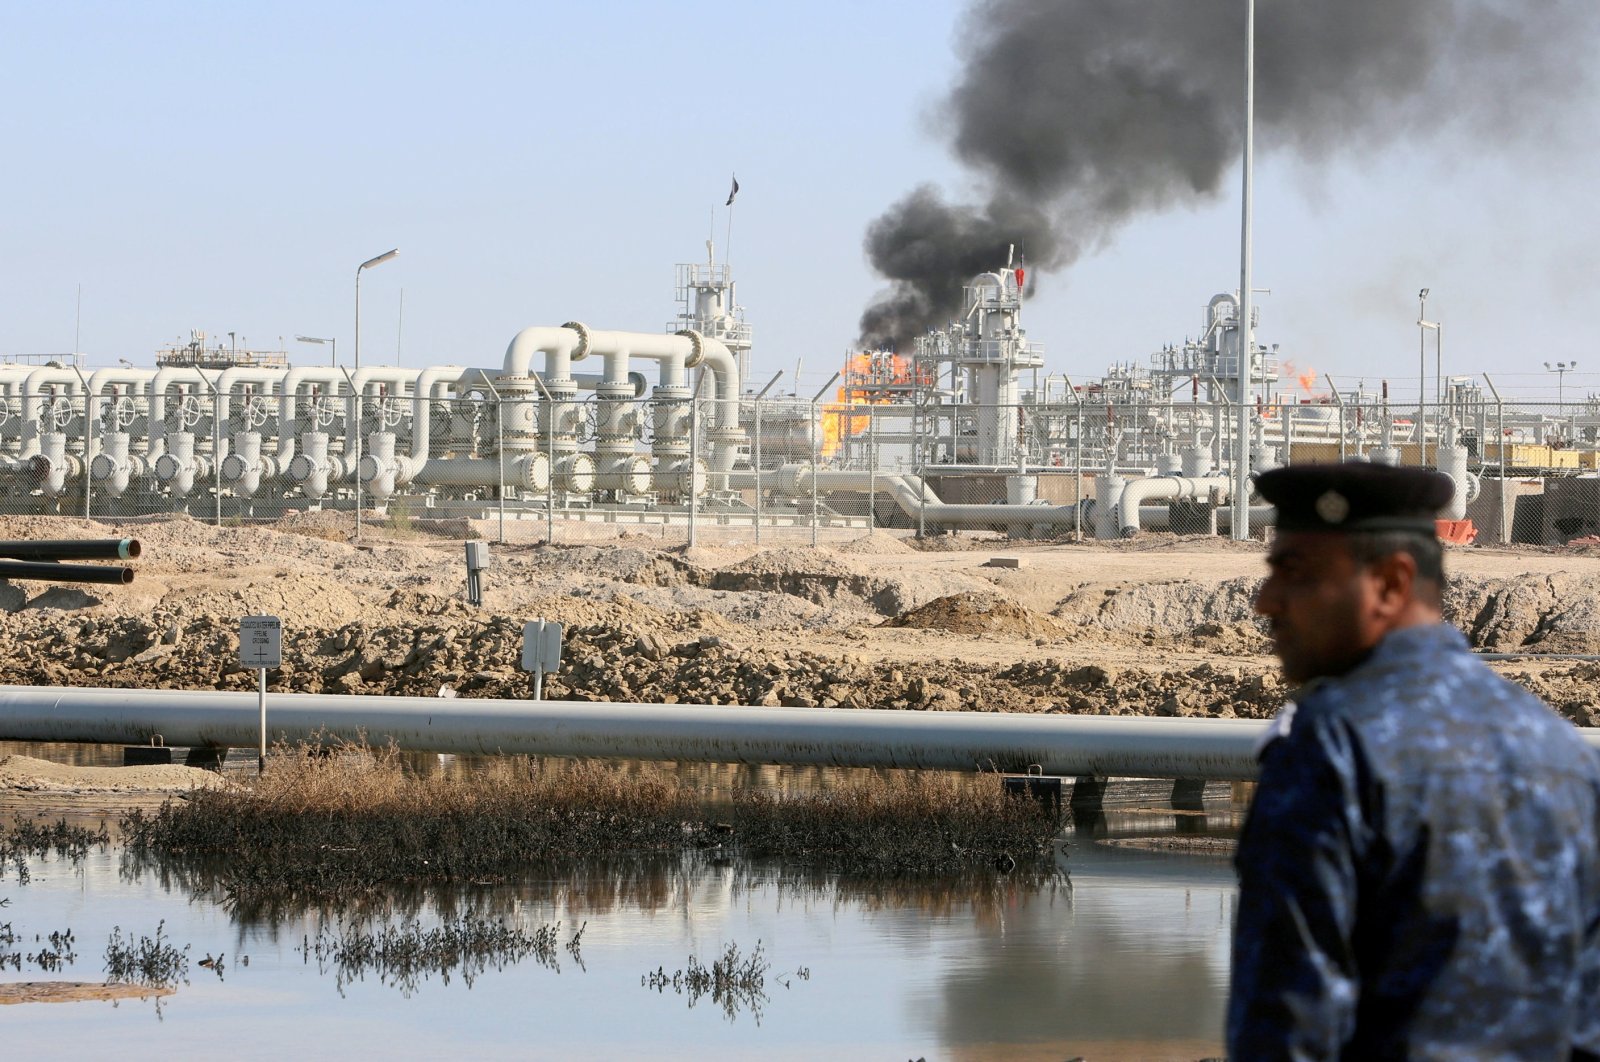 A police officer is seen at the West Qurna-1 oil field, which is operated by ExxonMobil, in Basra, Iraq, Jan. 9, 2020. (Reuters File Photo)